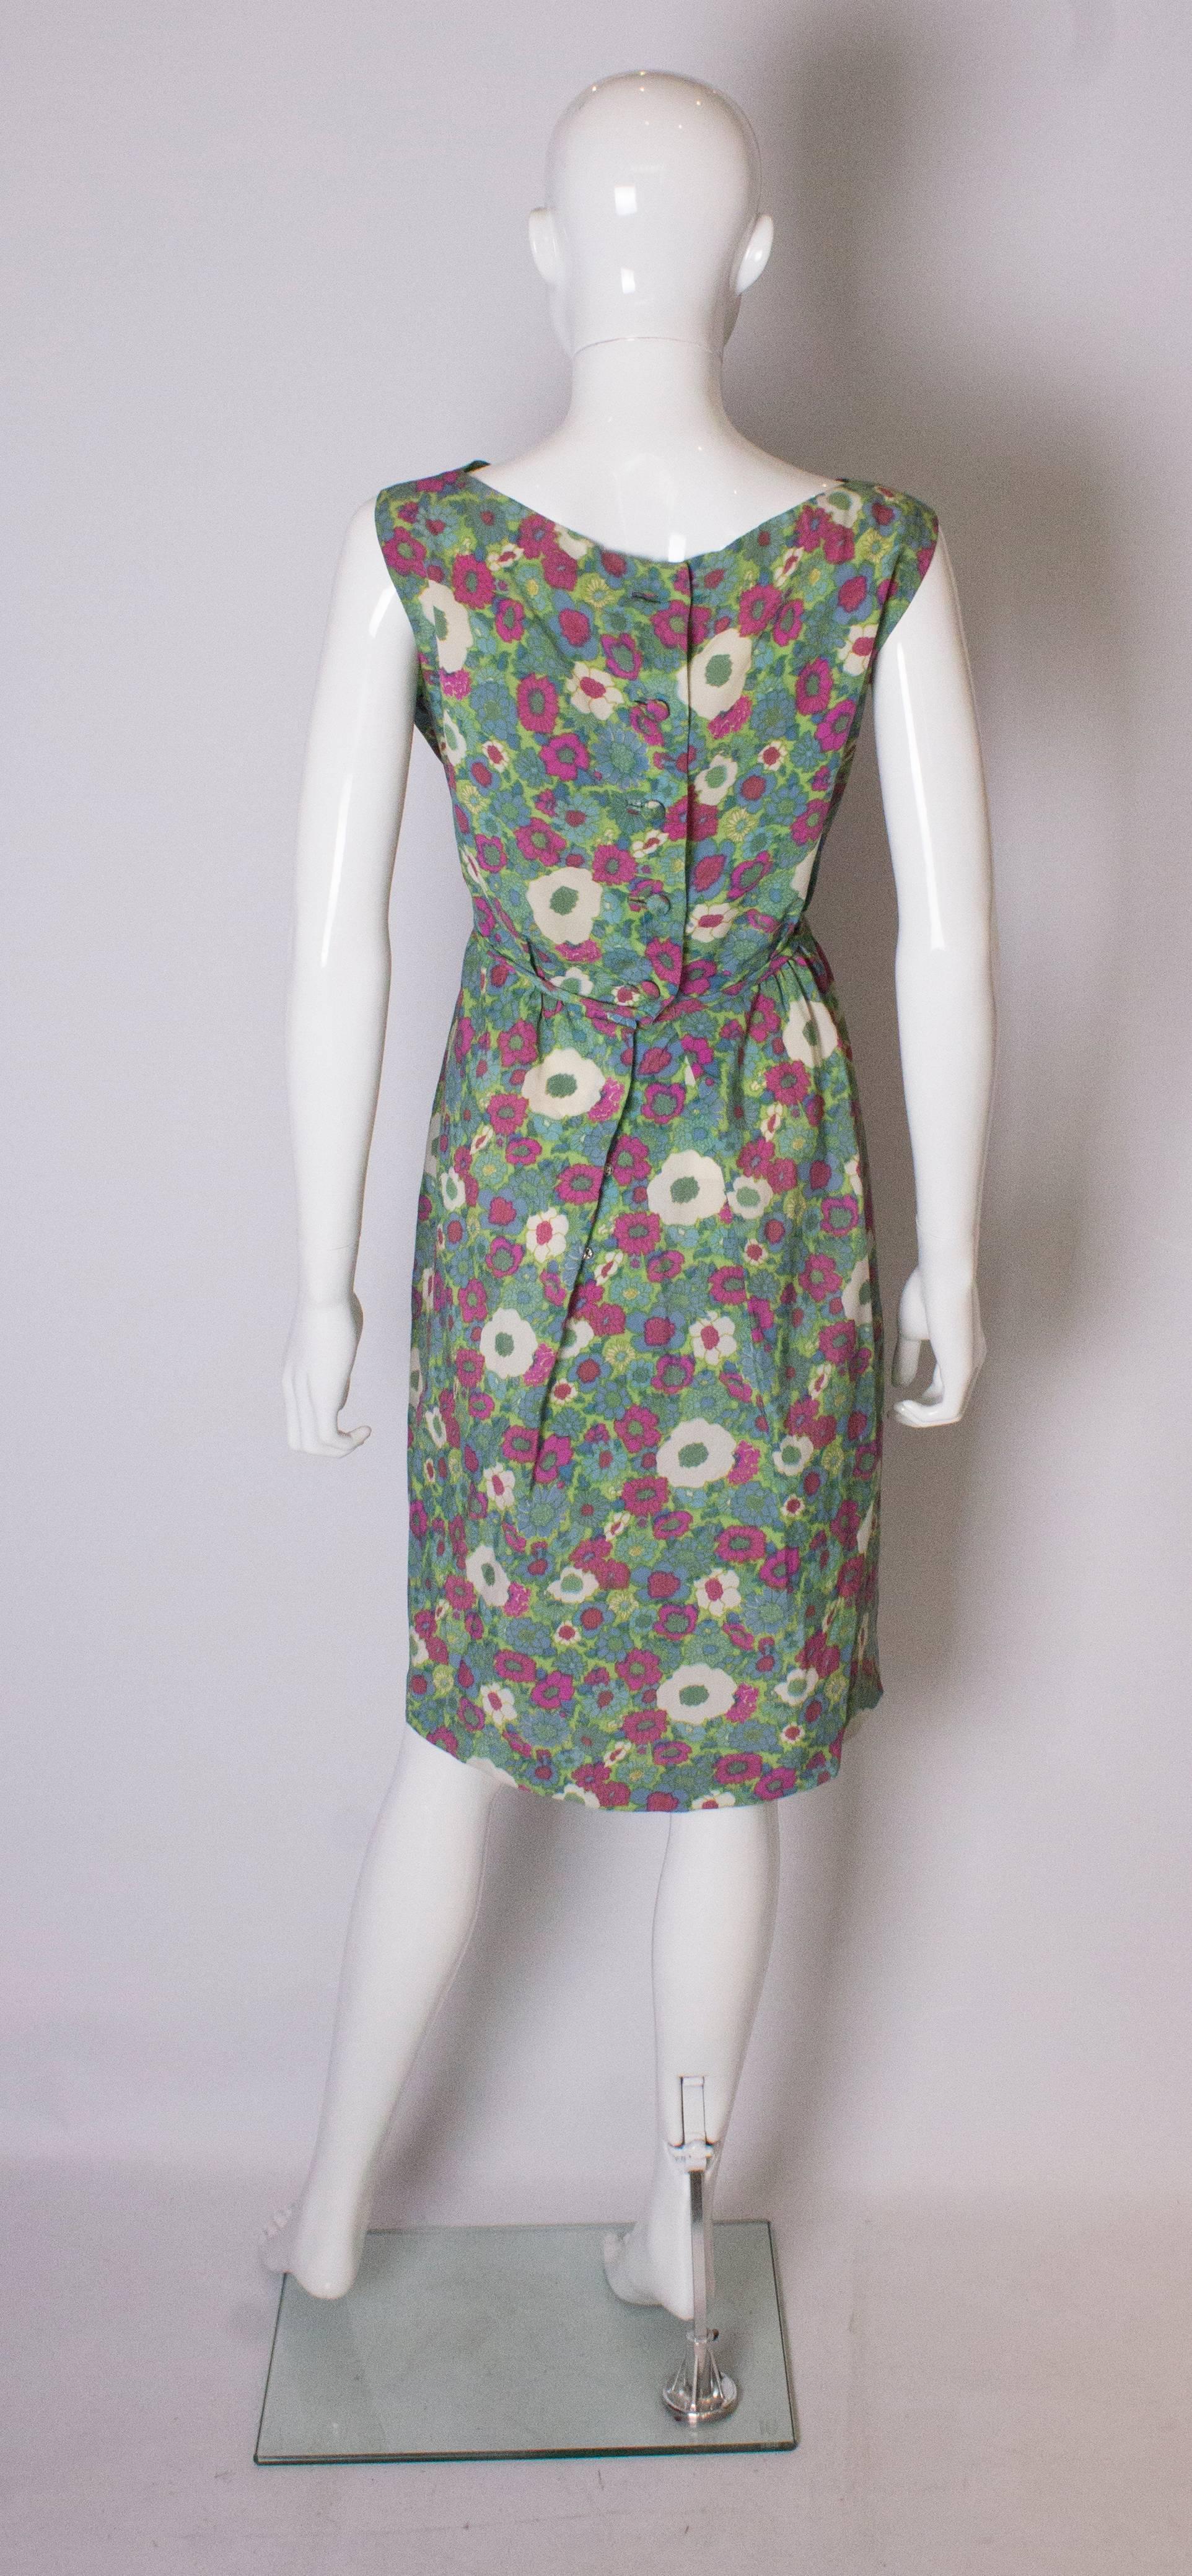 A Vintage 1960s Floral Print Summer Day Dress In Good Condition For Sale In London, GB